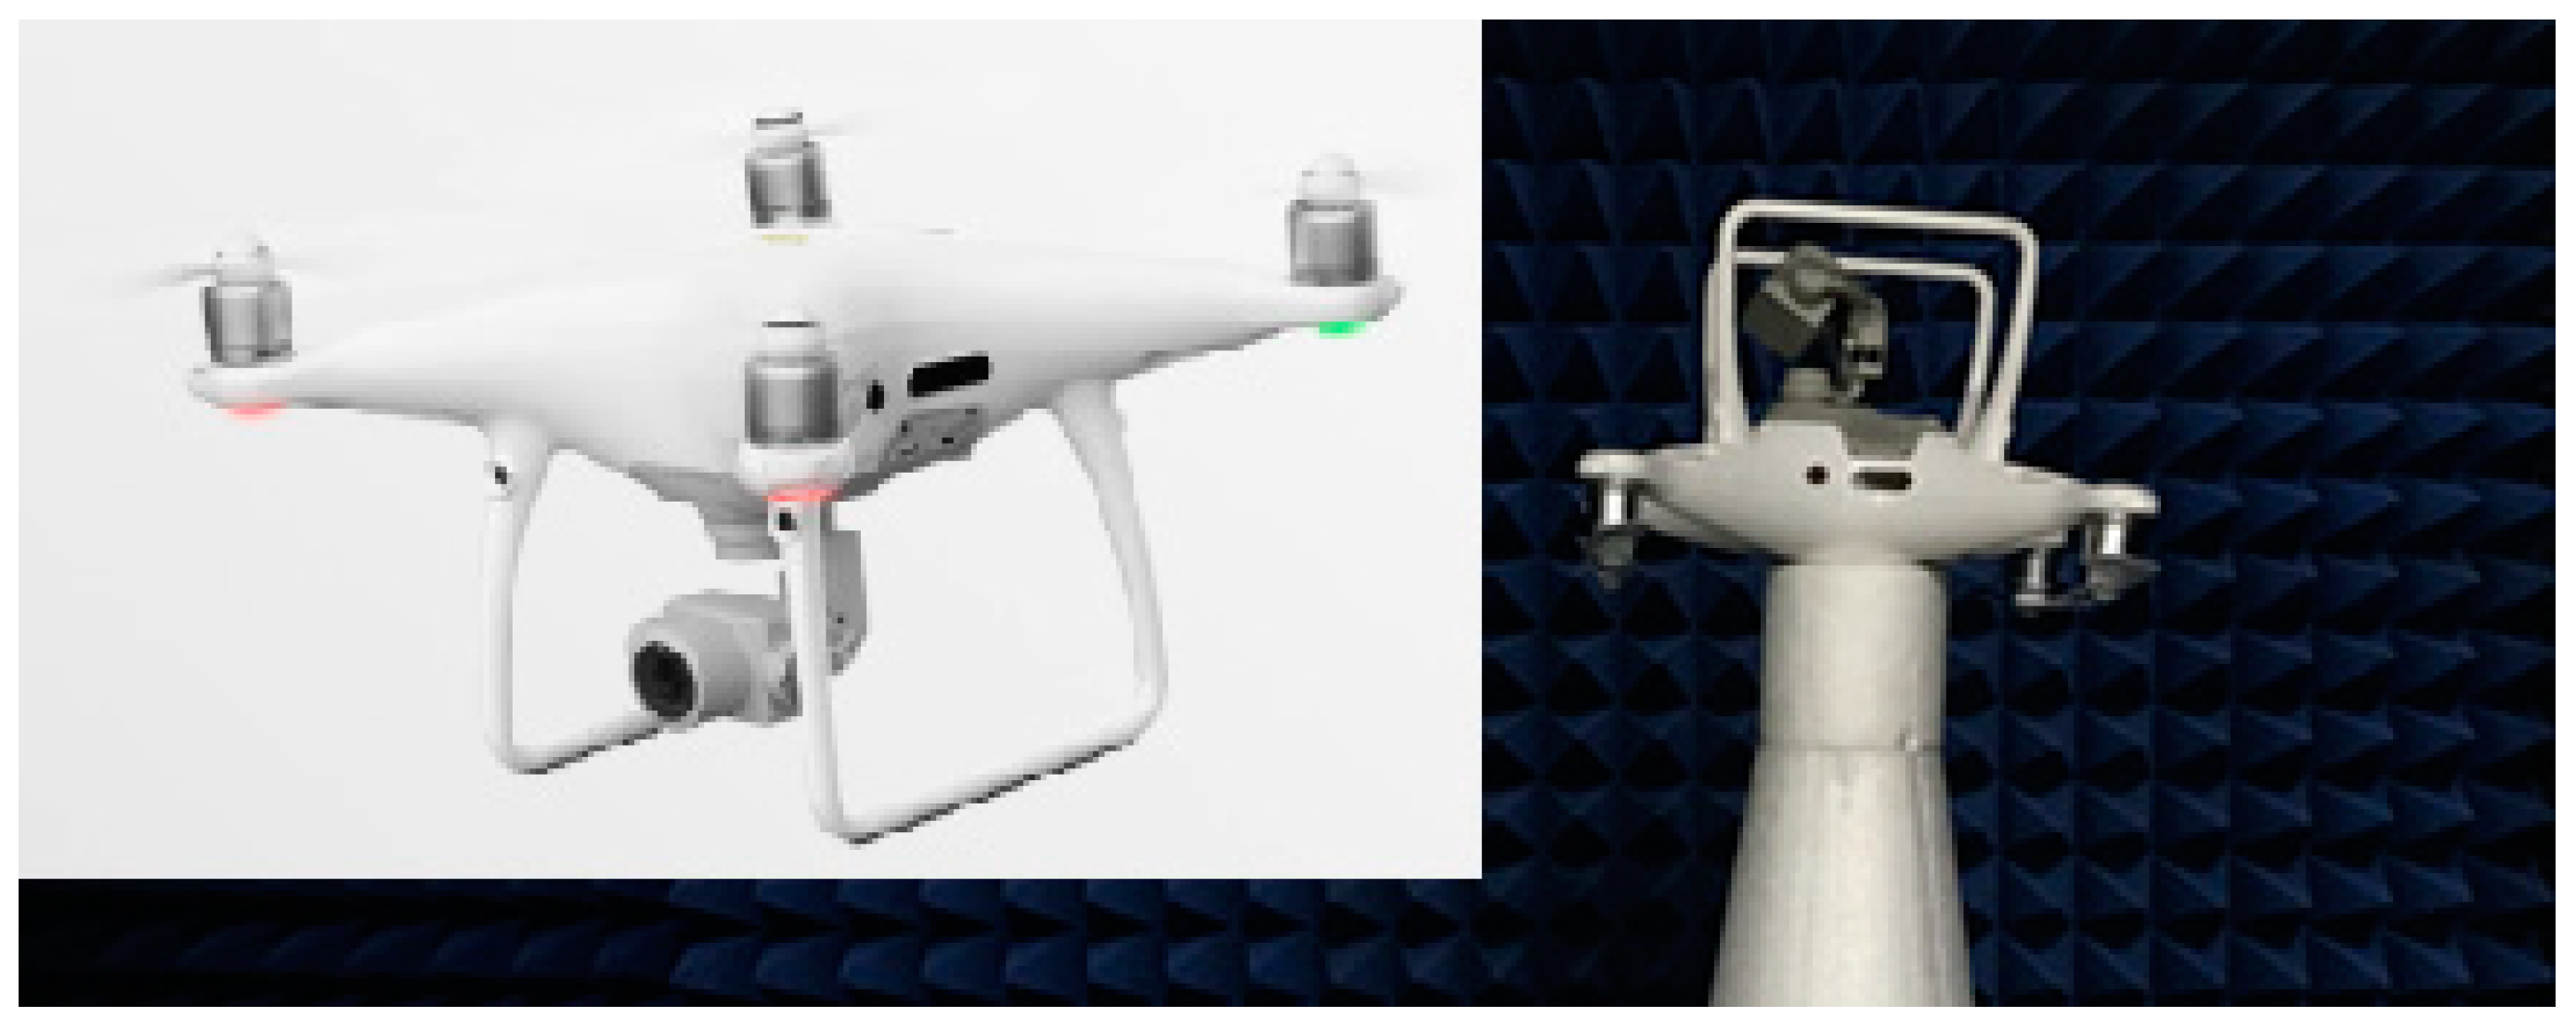 DJI Phantom 4 Pro + extends drone power and excitement